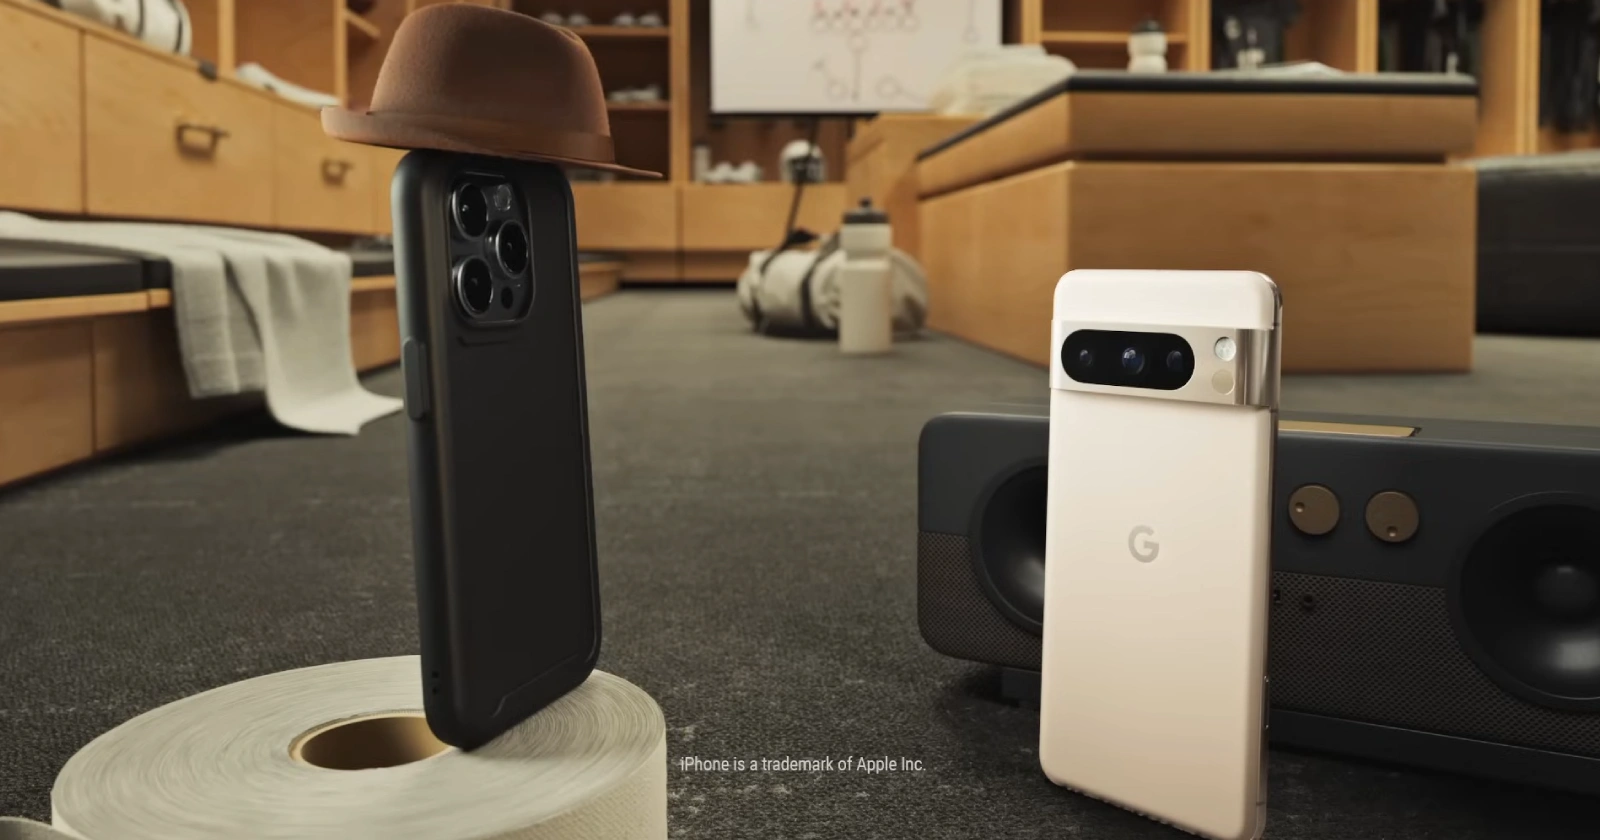 Google's latest #BestPhonesForver ad is yet another hilarious dig at iPhone missing out on AI features